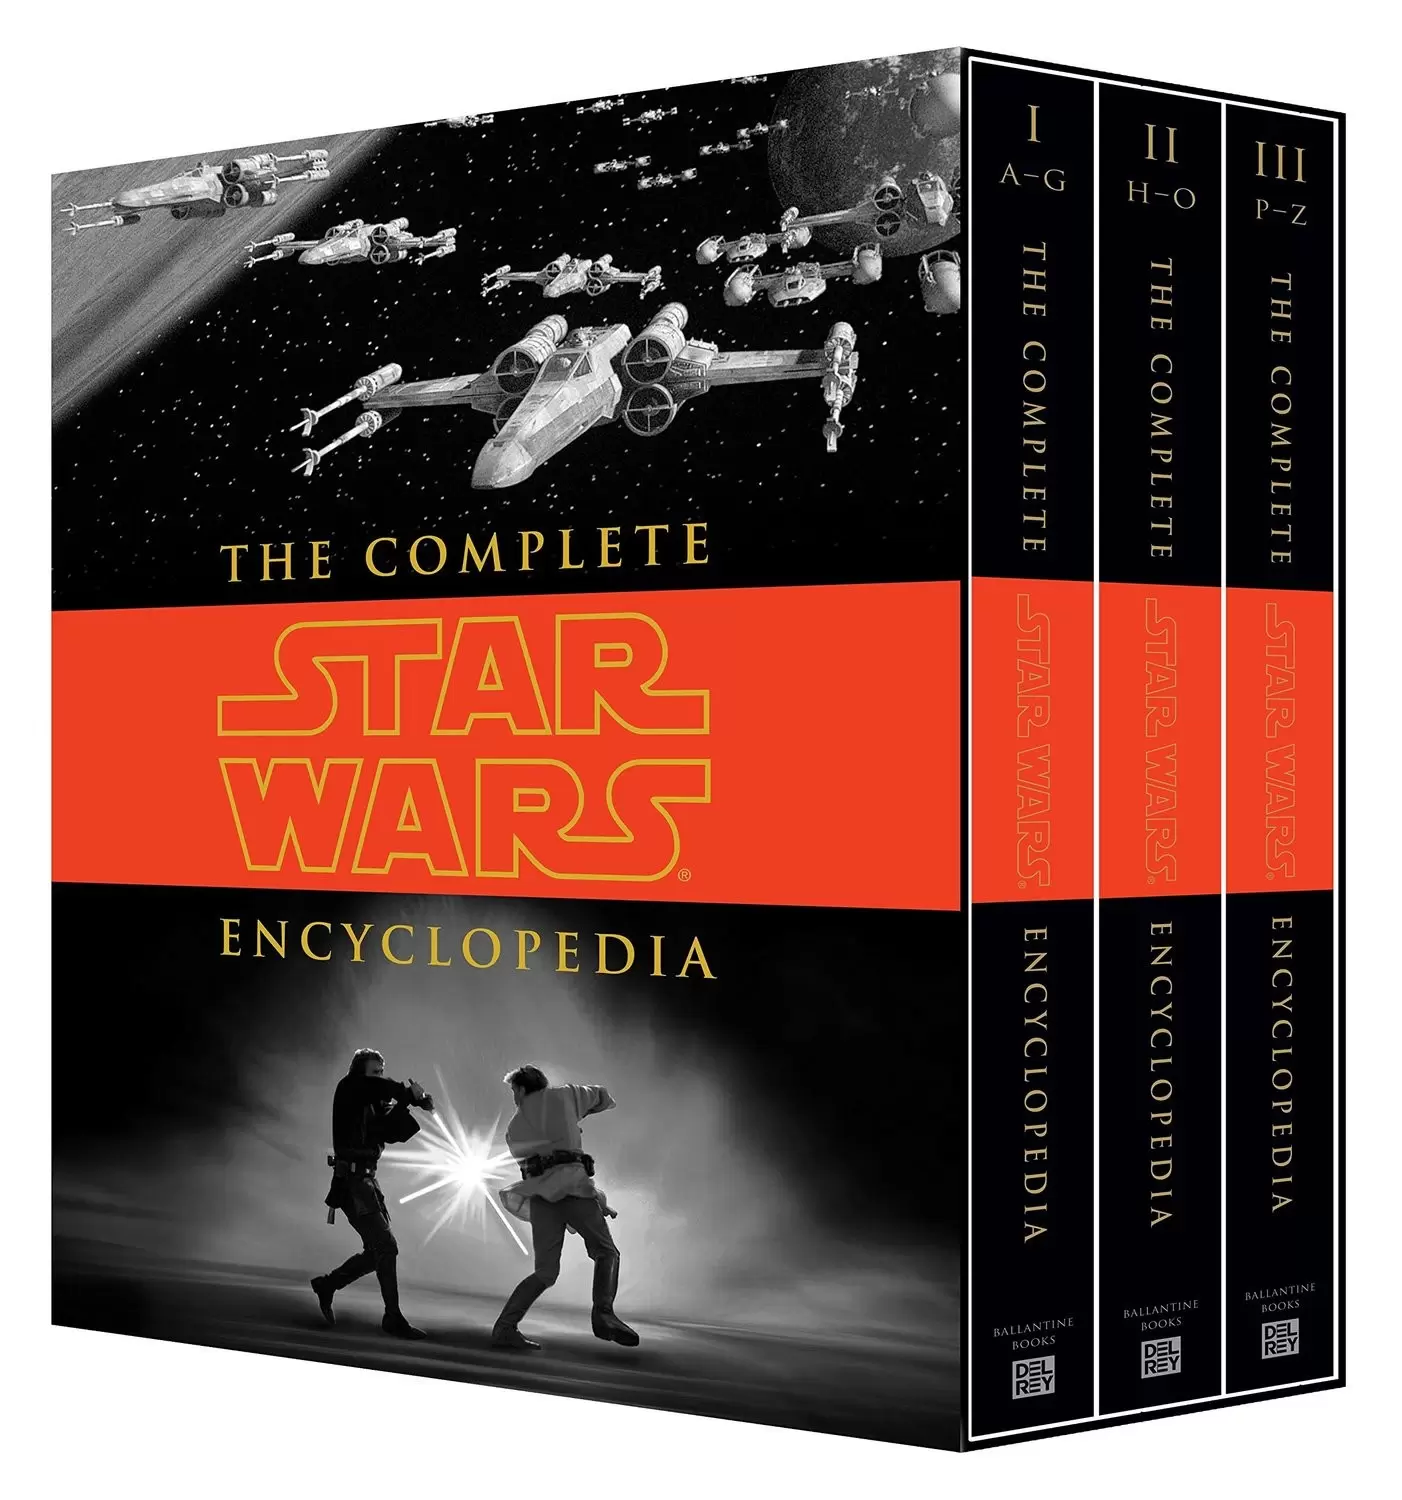 Beaux livres Star Wars - The Complete Star Wars Encyclopedia